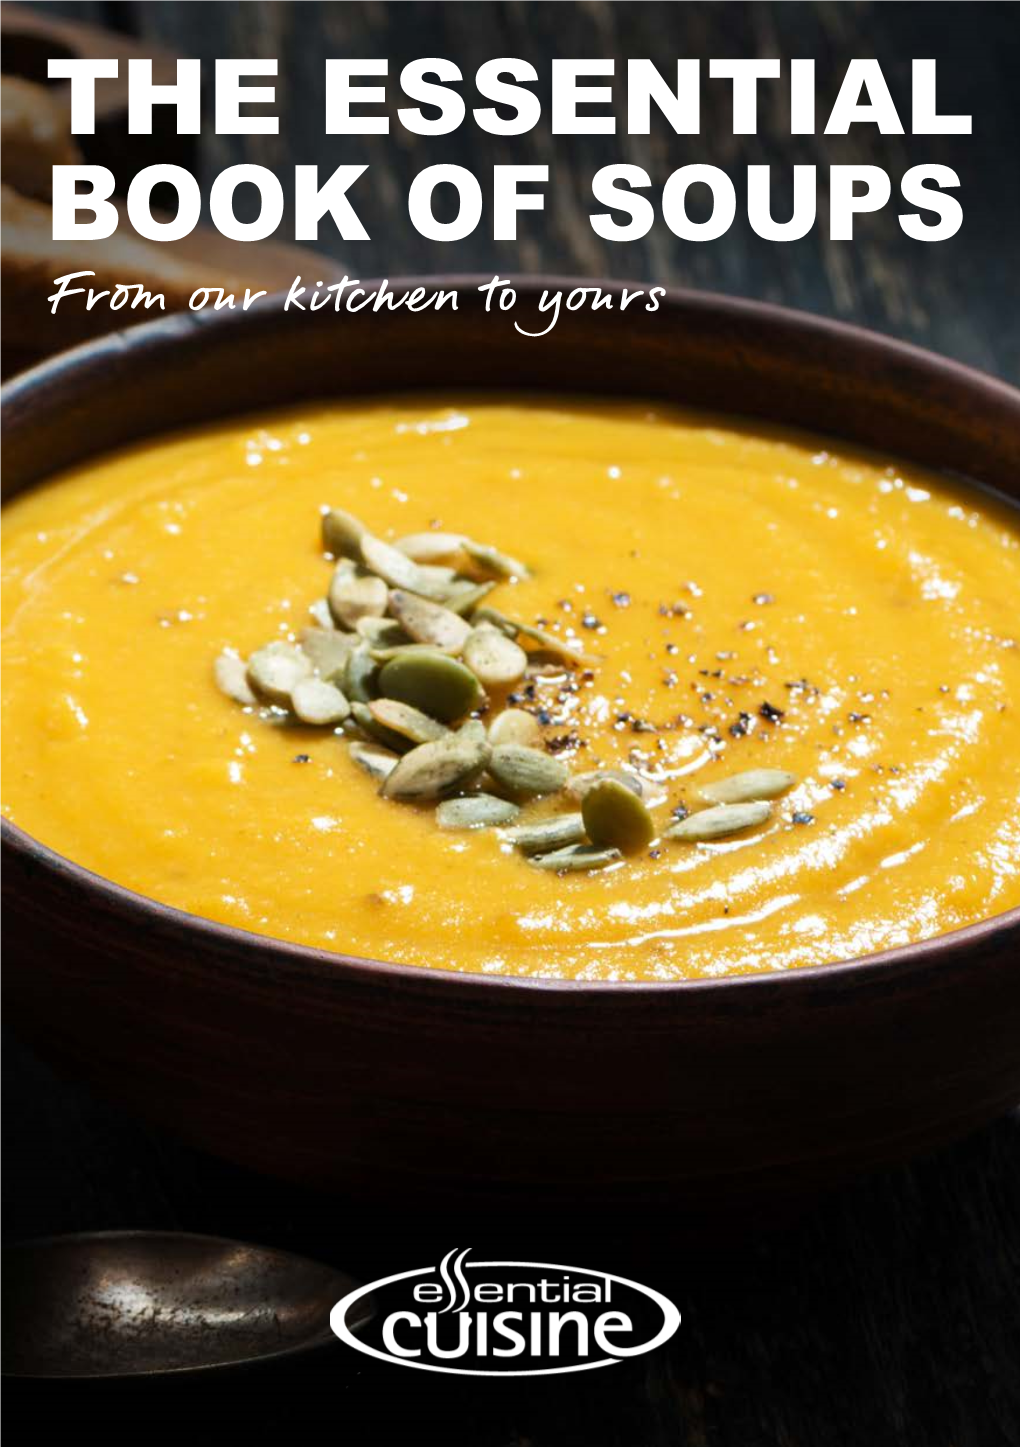 THE ESSENTIAL BOOK of SOUPS from Our Kitchen to Yours Contents